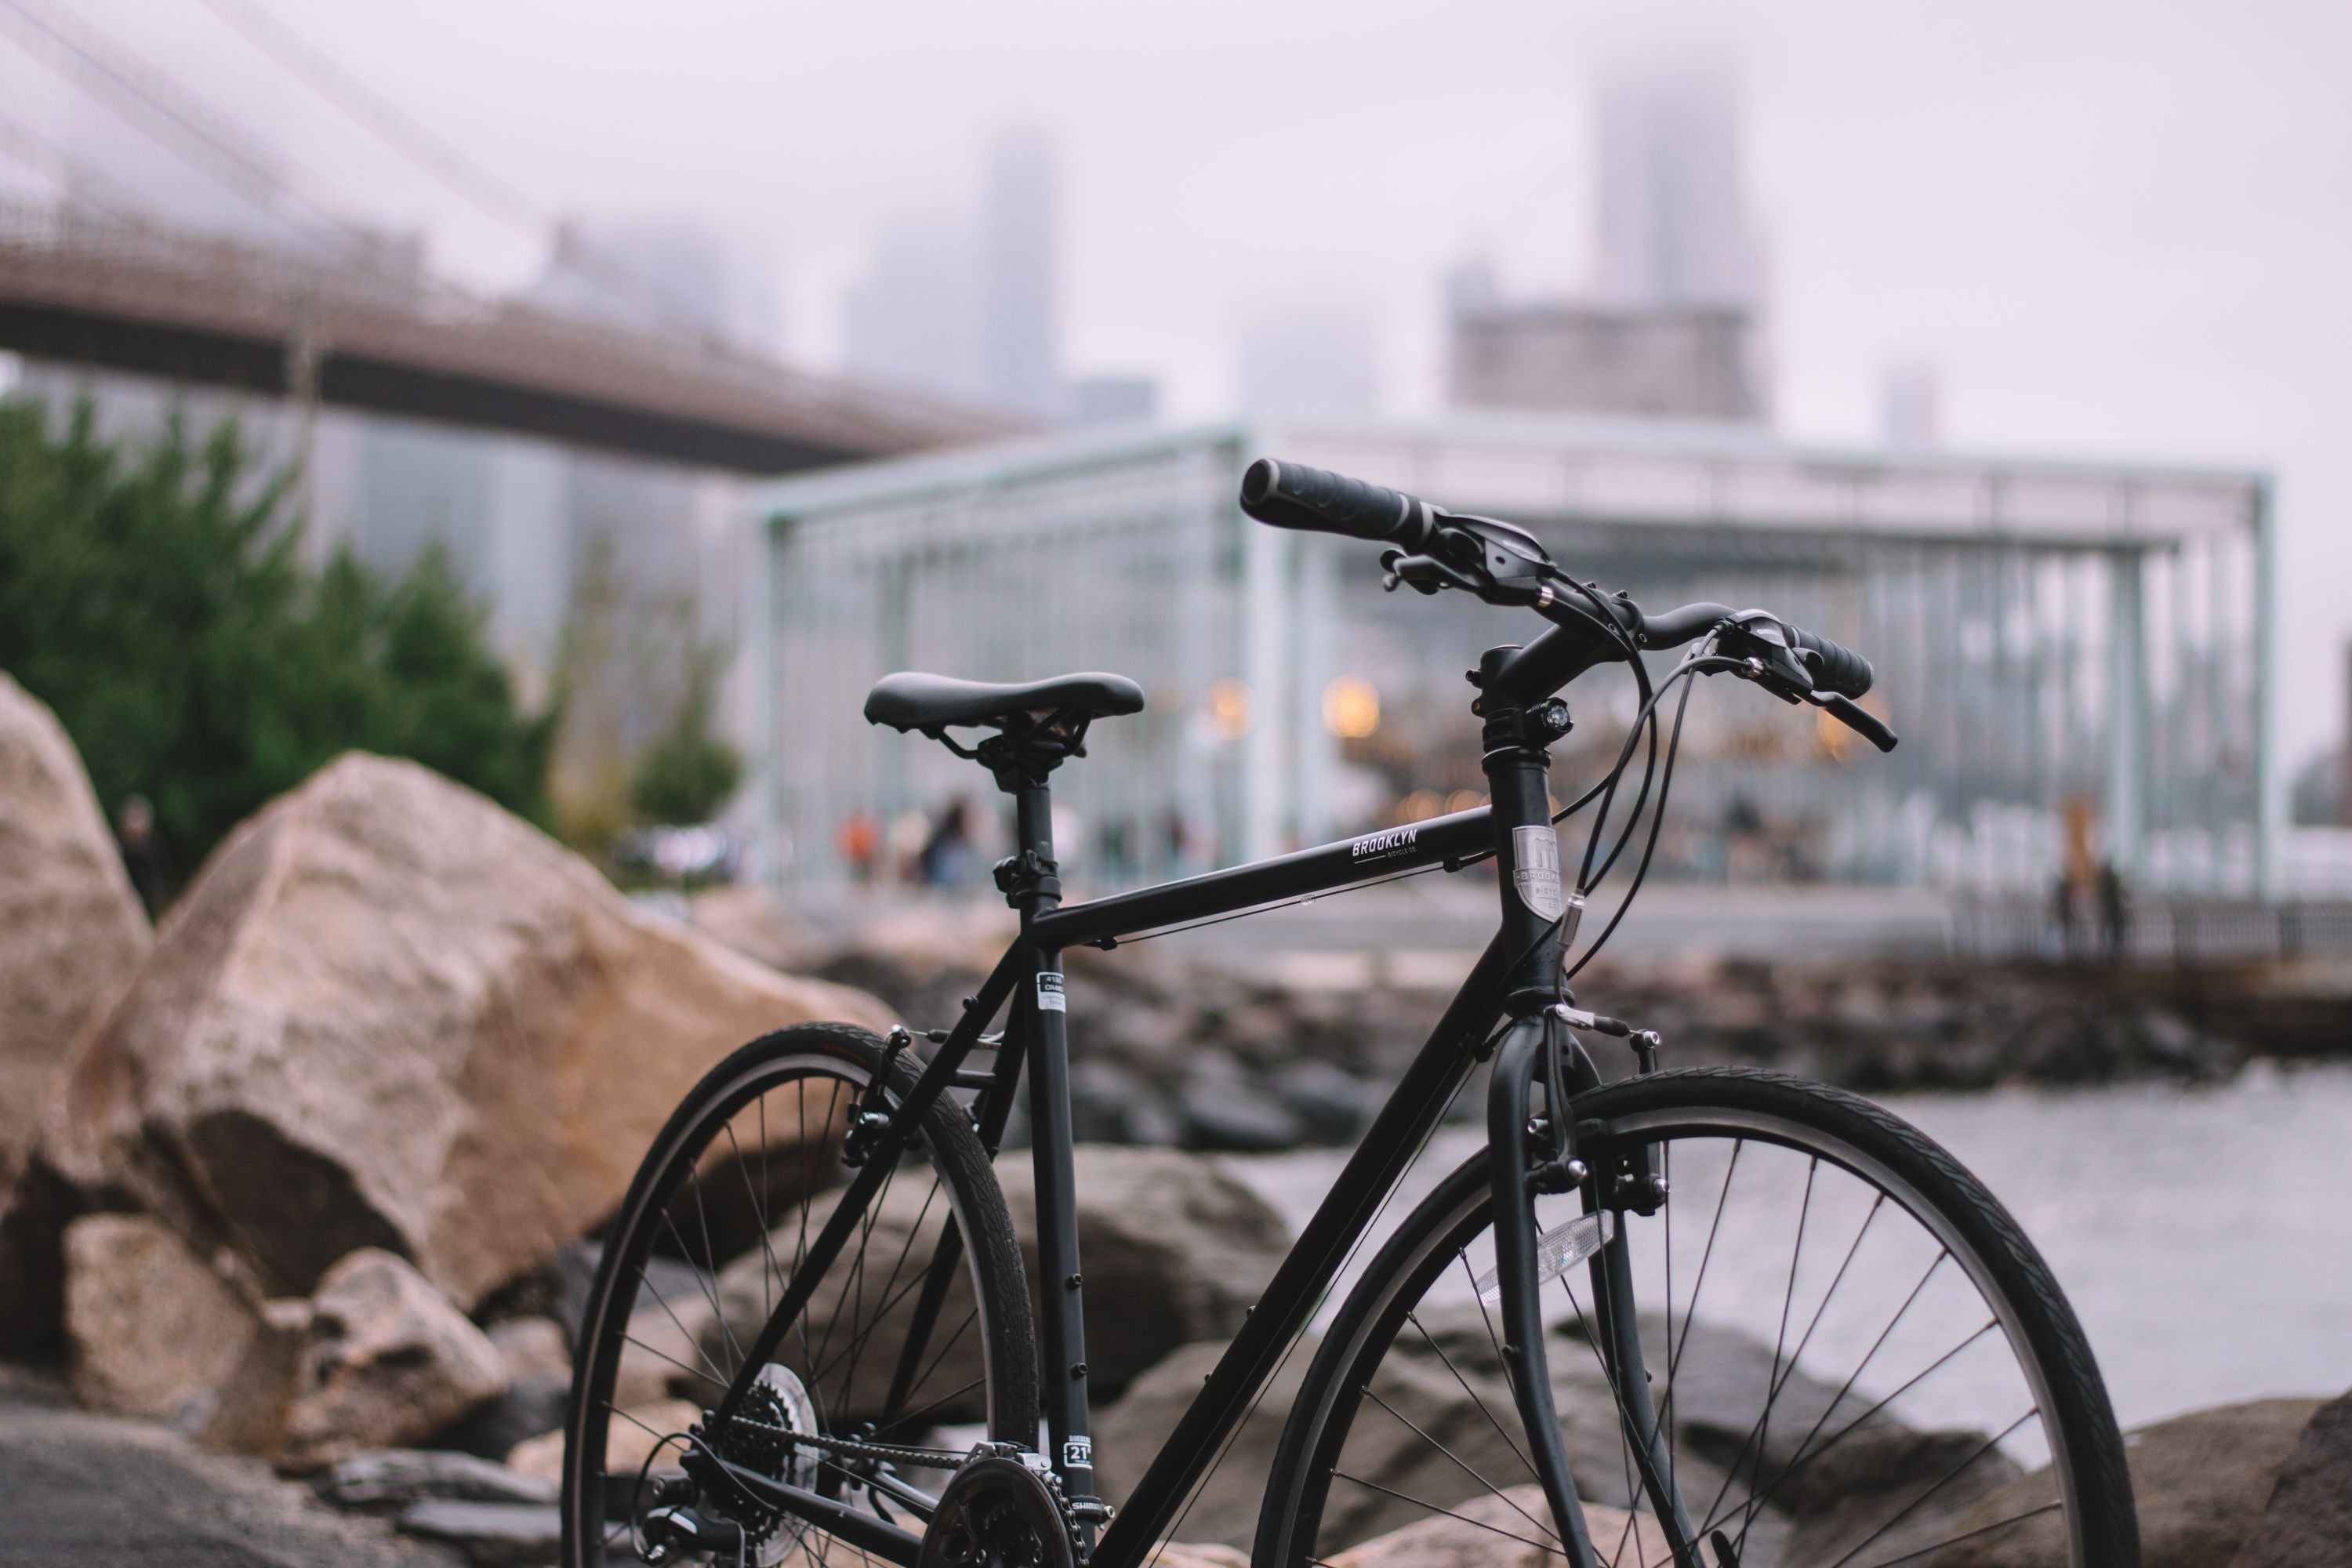 Top Five Things to Consider When Buying a Commuter Bike